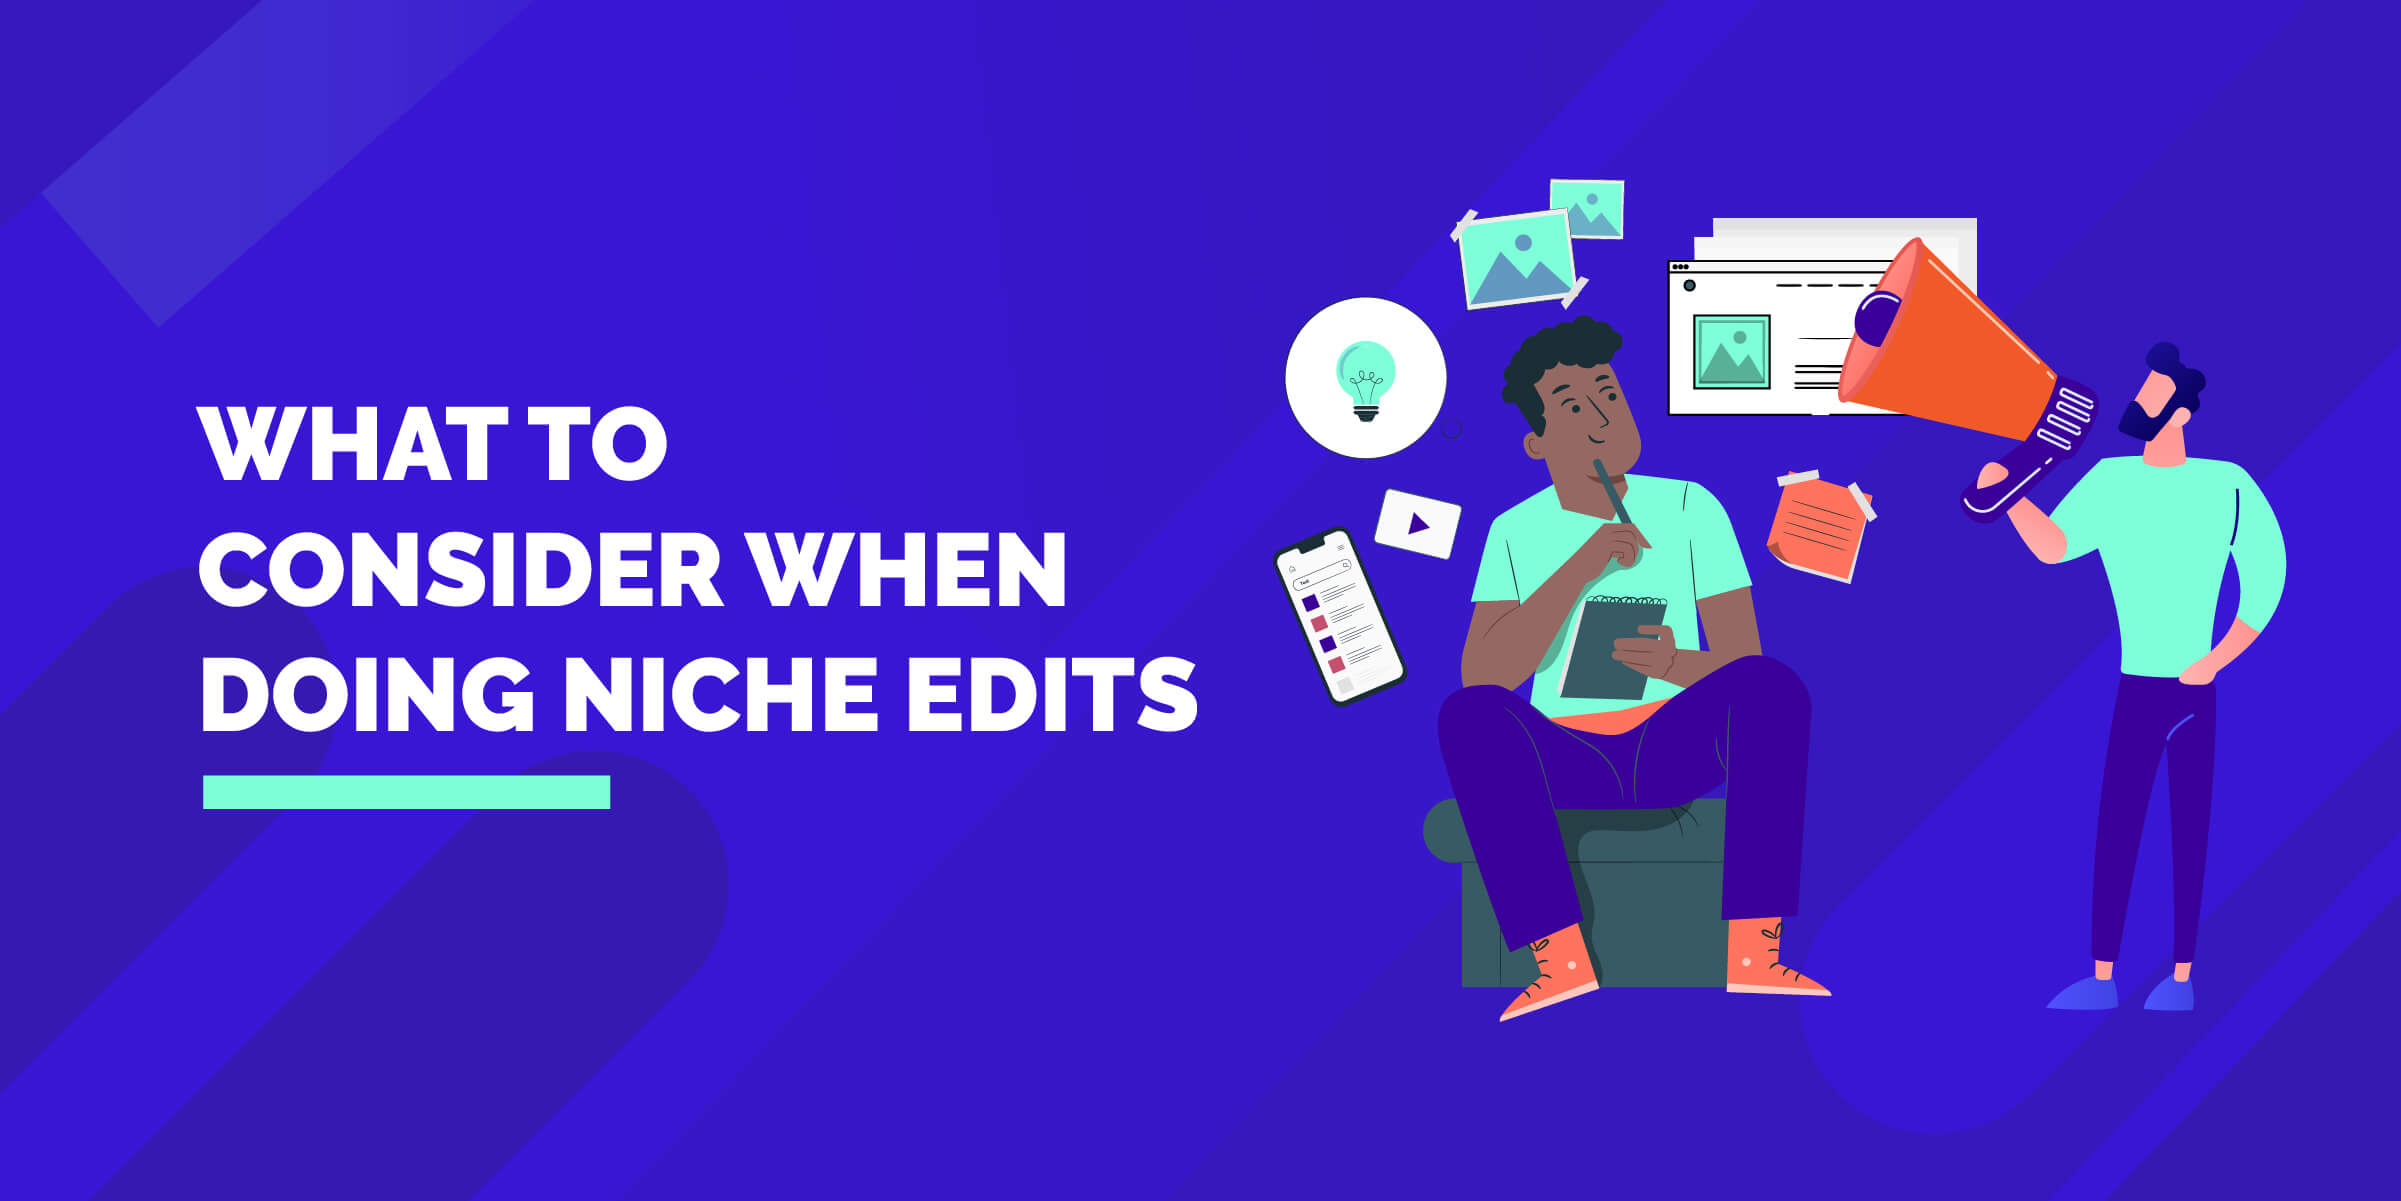 What To Consider for Niche Edits